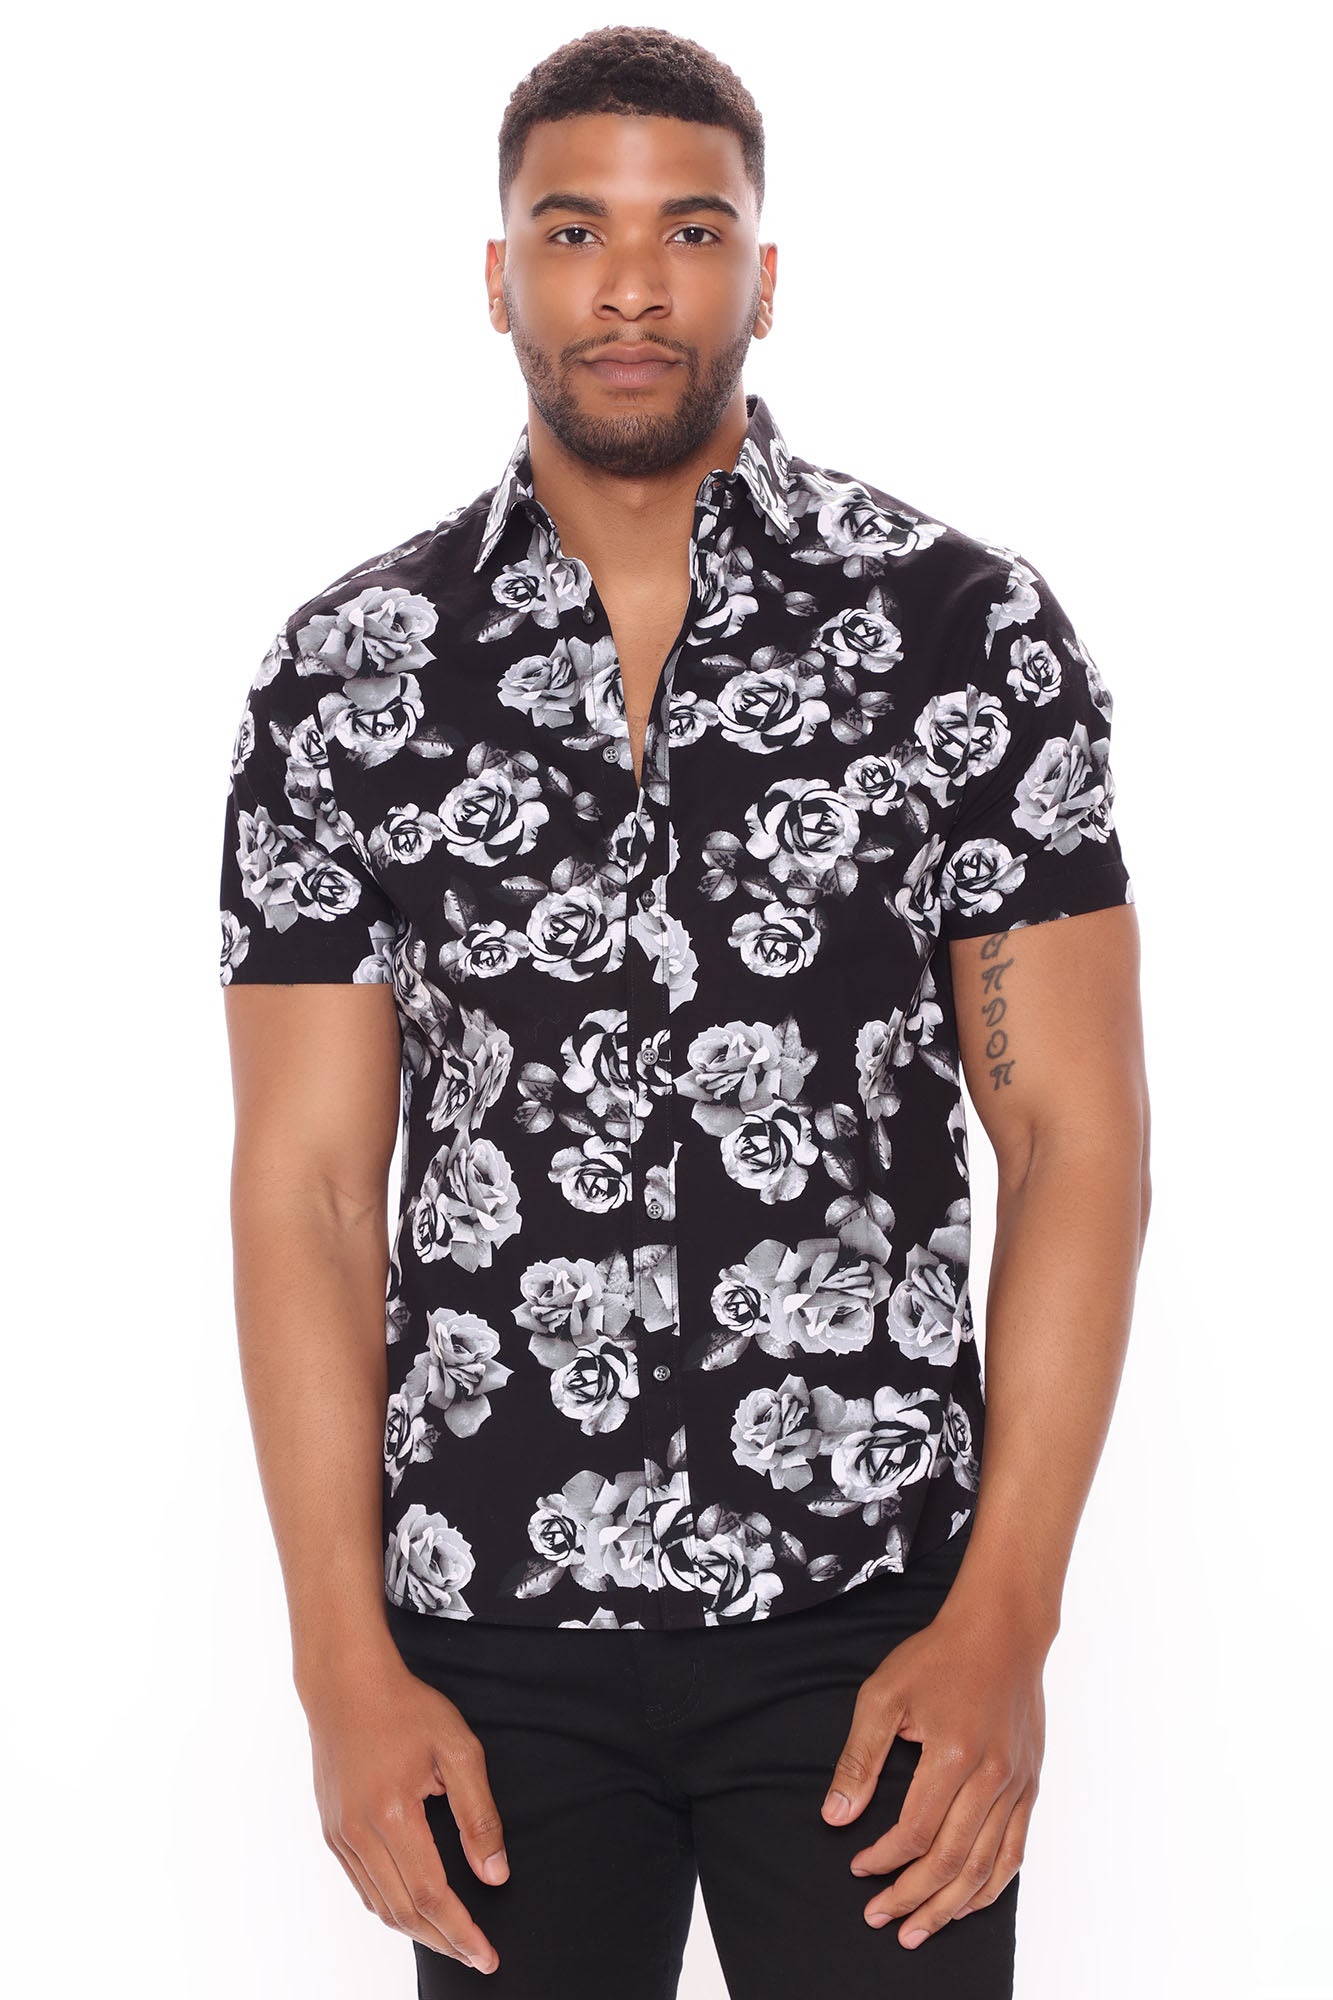 All Over Floral Short Sleeve Woven Top - Black/White | Fashion